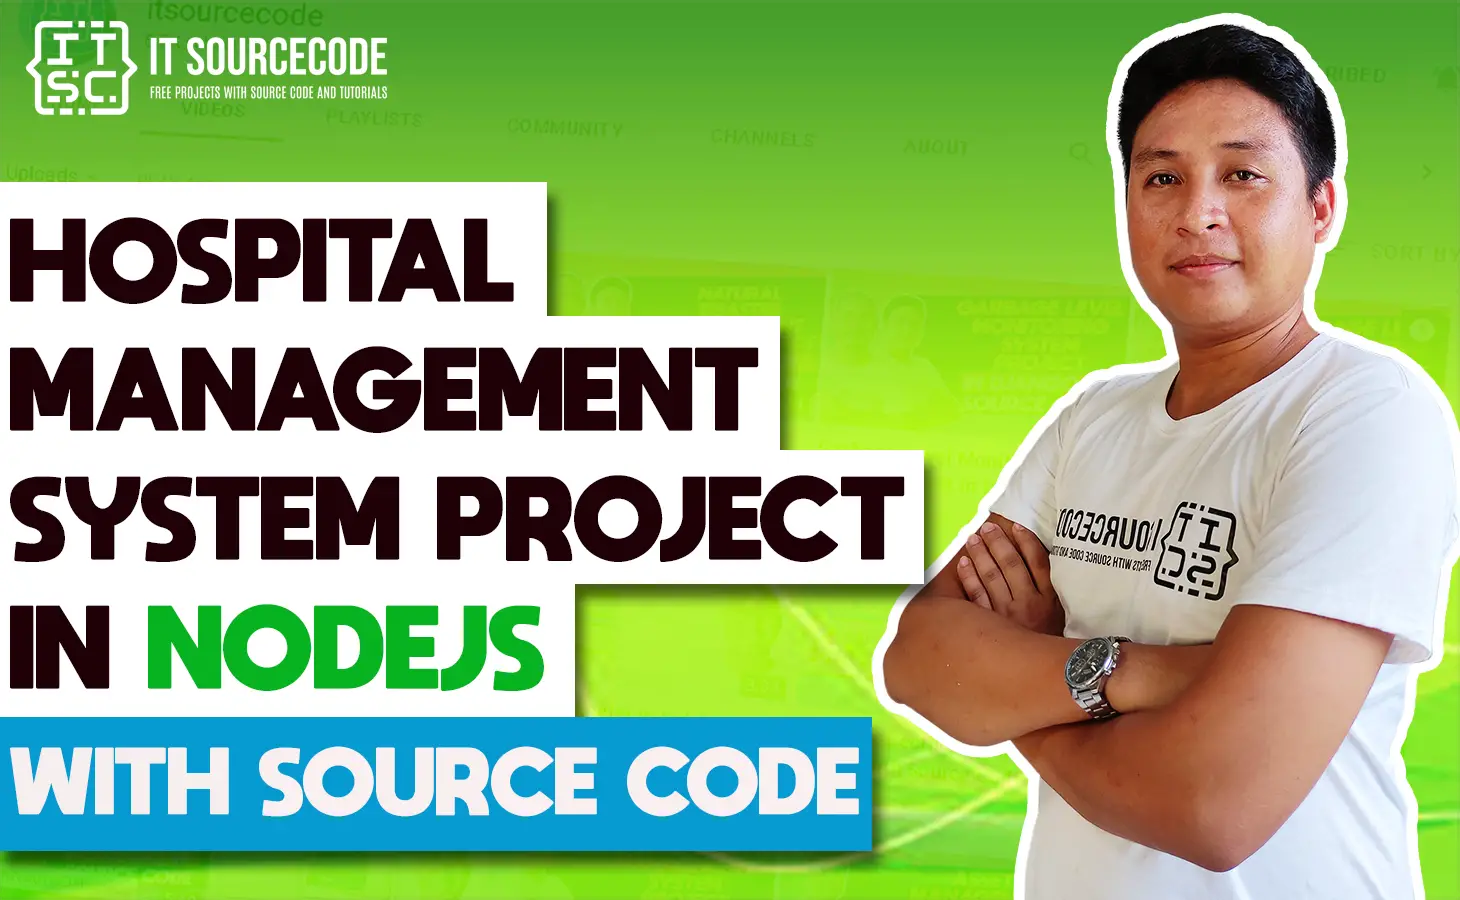 Hospital Management System Project Node JS with Source Code